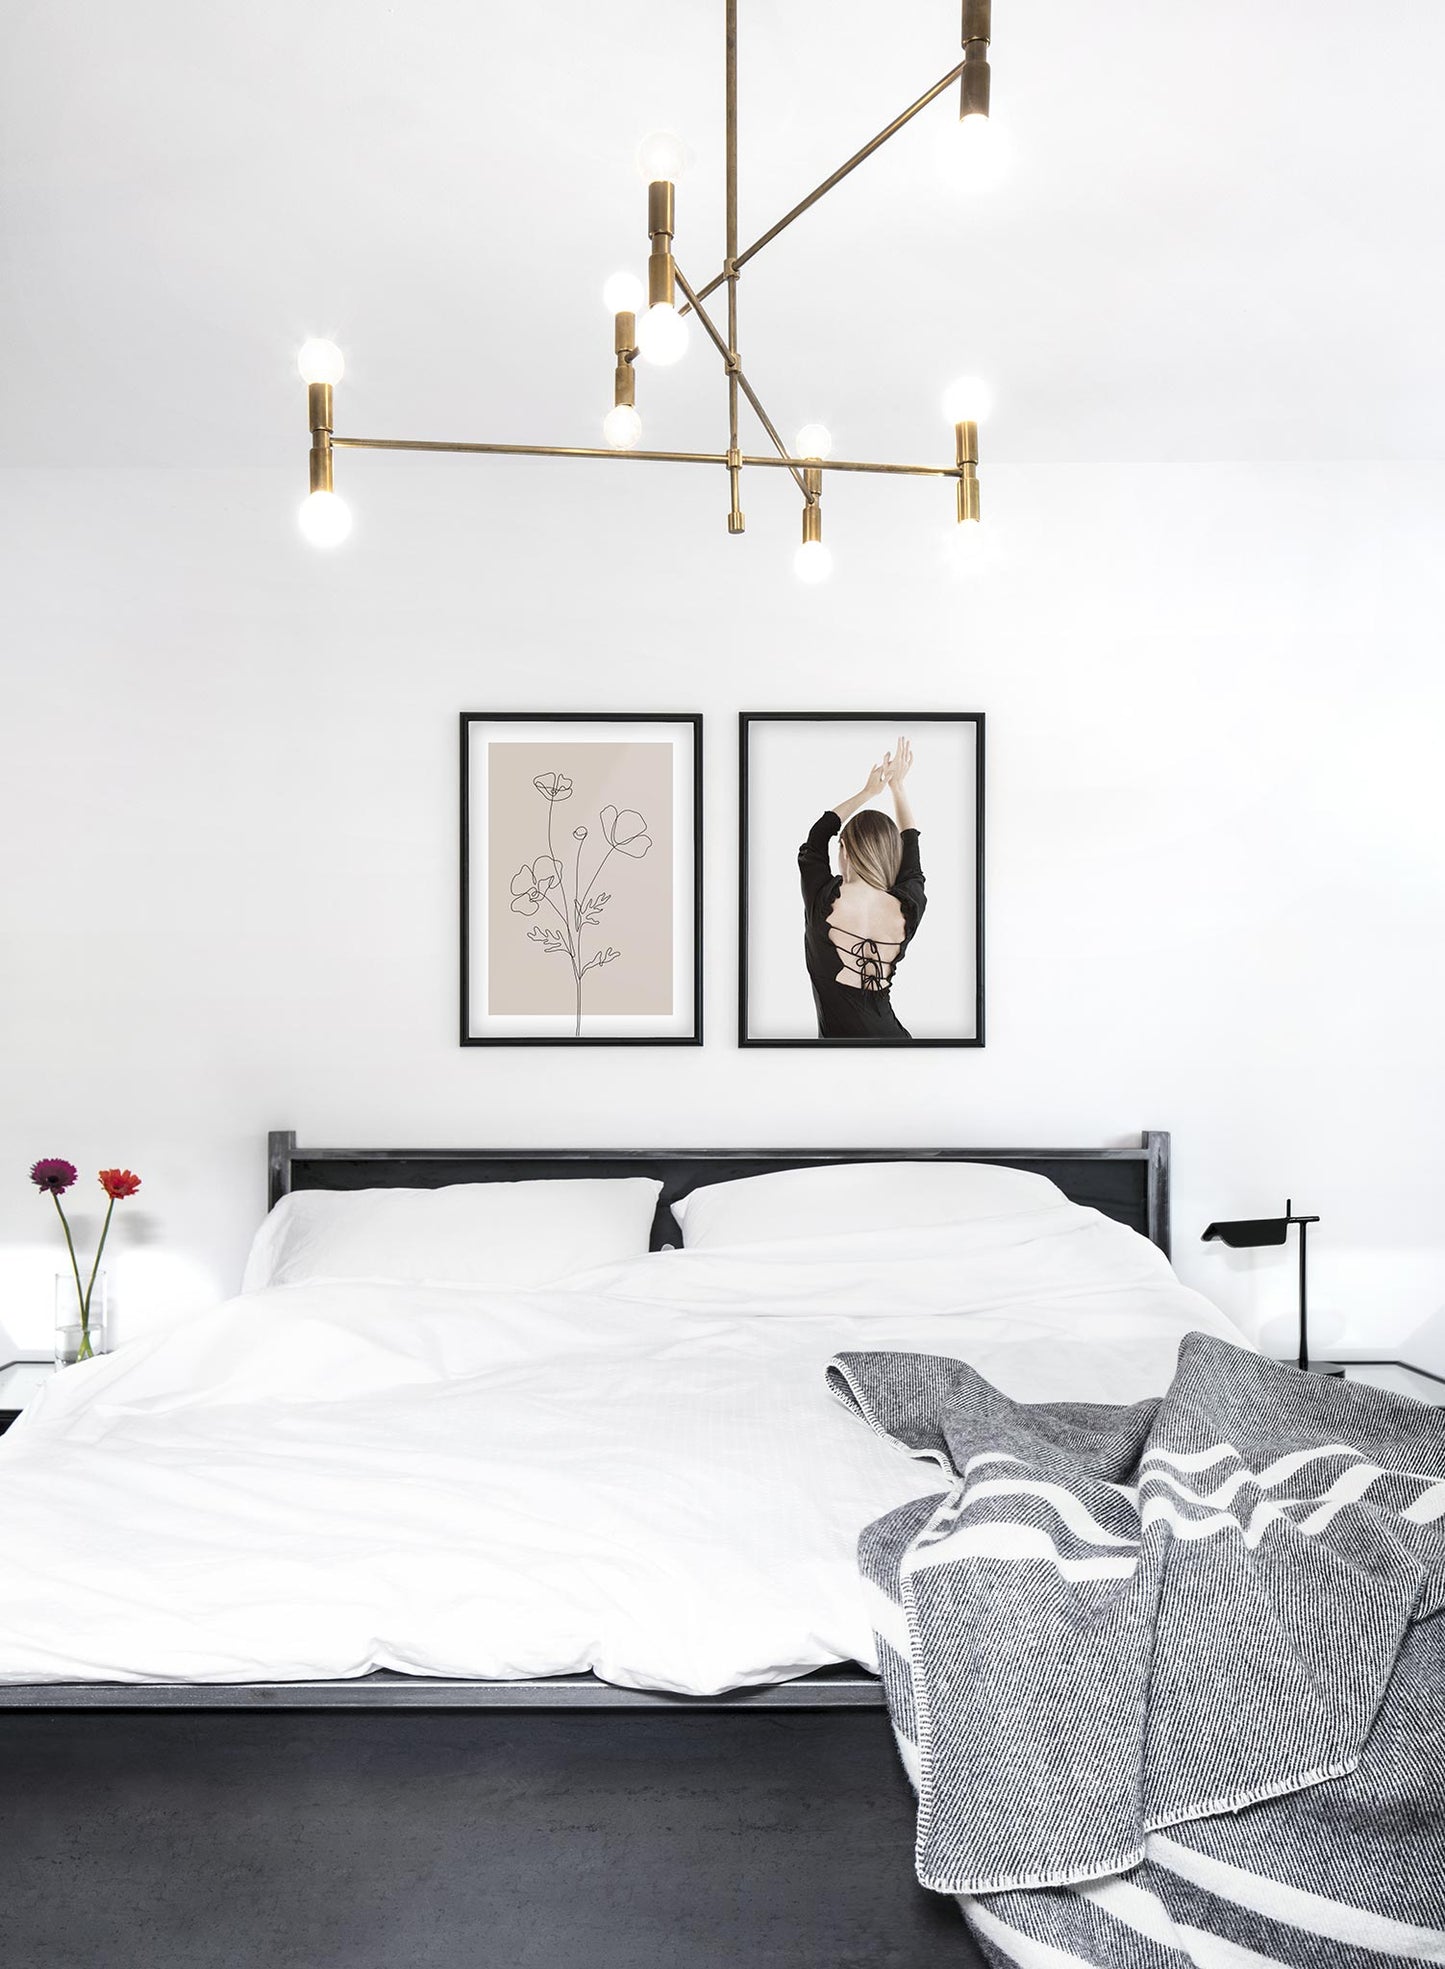 Fashion photography poster by Opposite Wall with woman celebrating - Lifestyle Duo - Bedroom